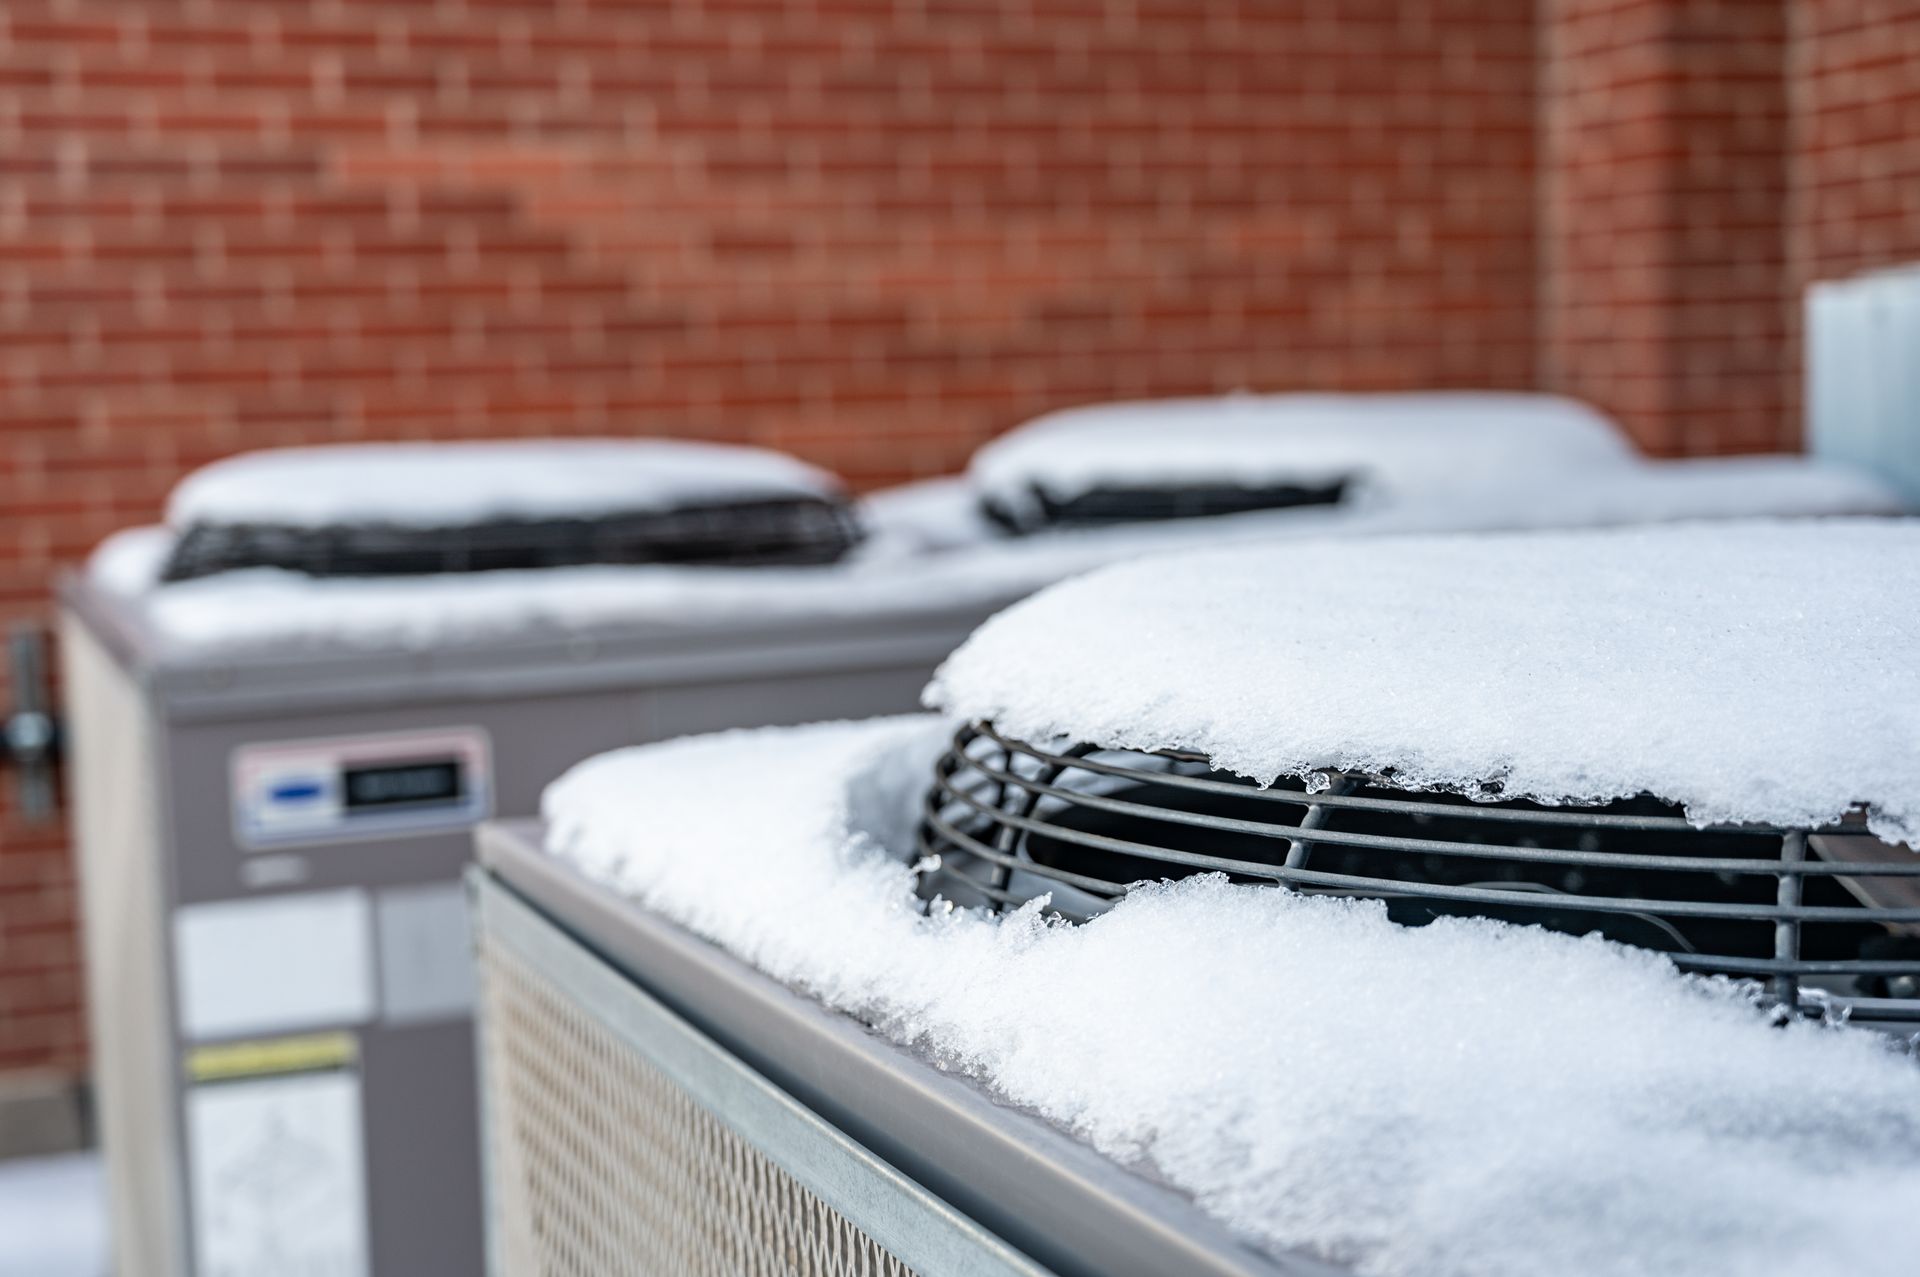 two air conditioners are covered in snow in front of a brick building